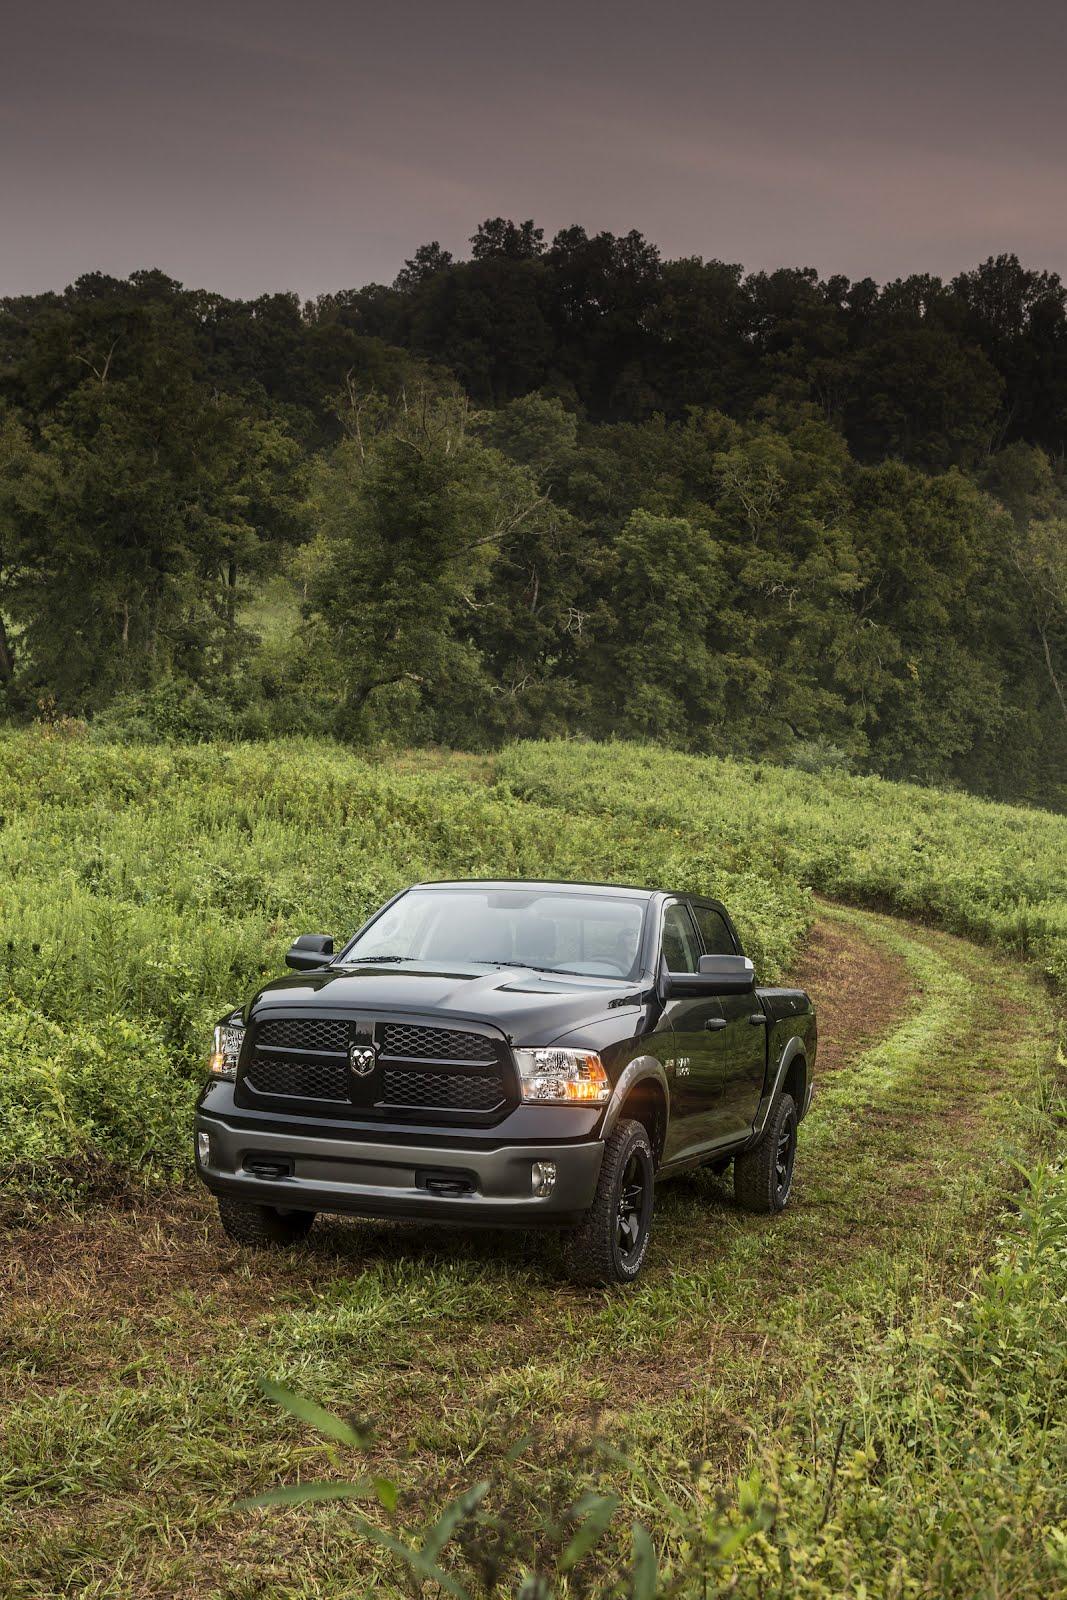 Dodge Ram 1500 Outdoorsman 2013 photo 83356 picture at high resolution